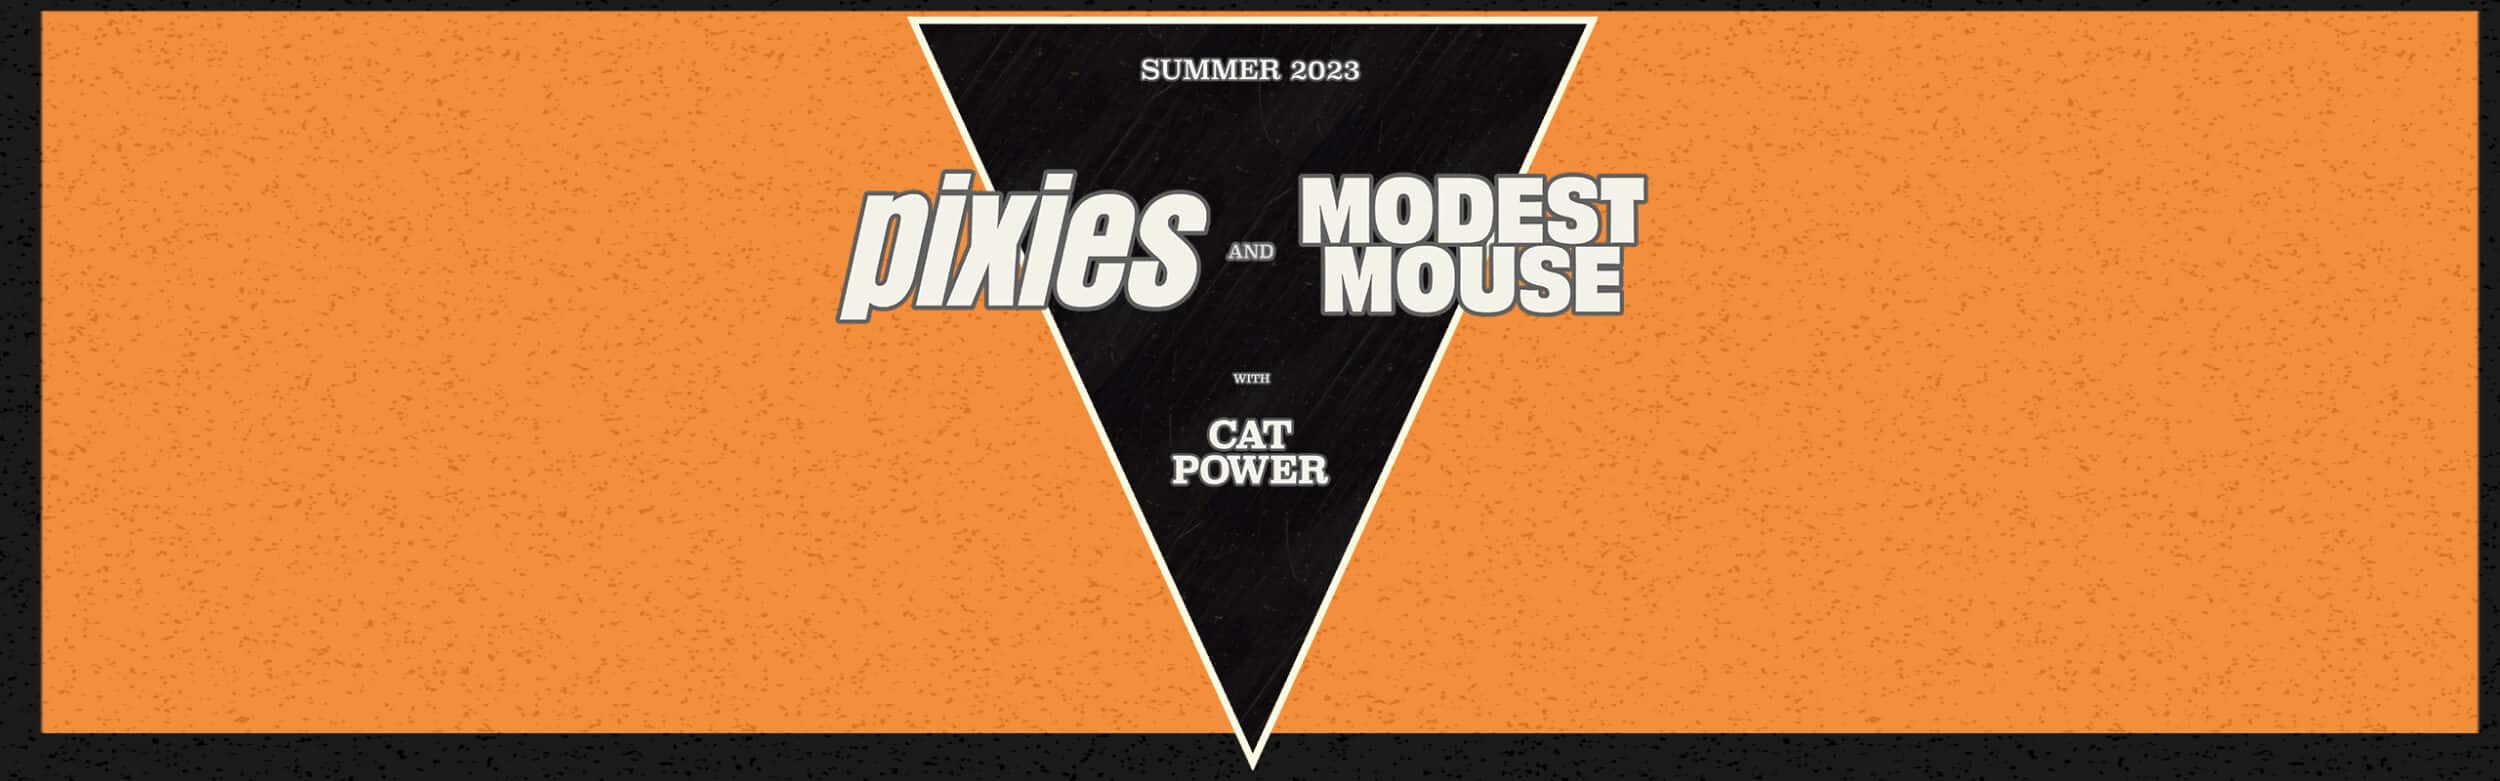 Pixies and Modest Mouse